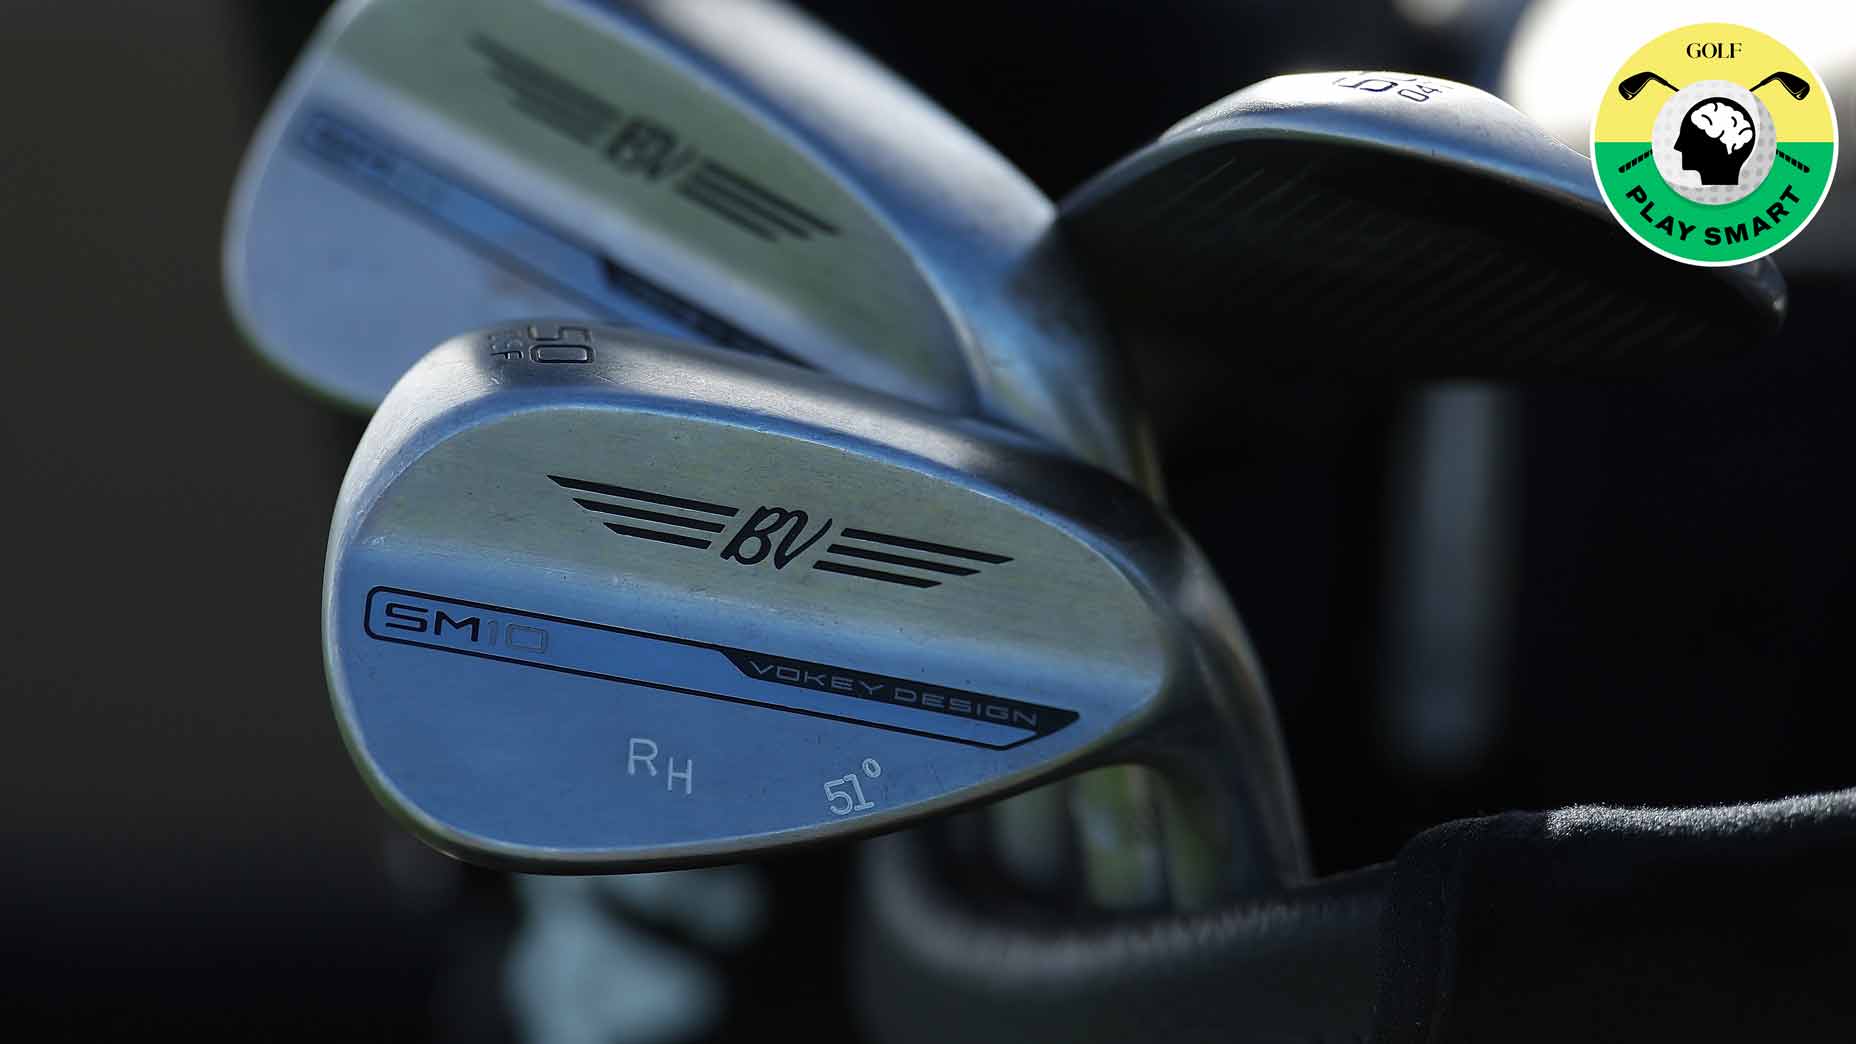 russell henley's titleist vokey sm10 wedge in a bag of clubs